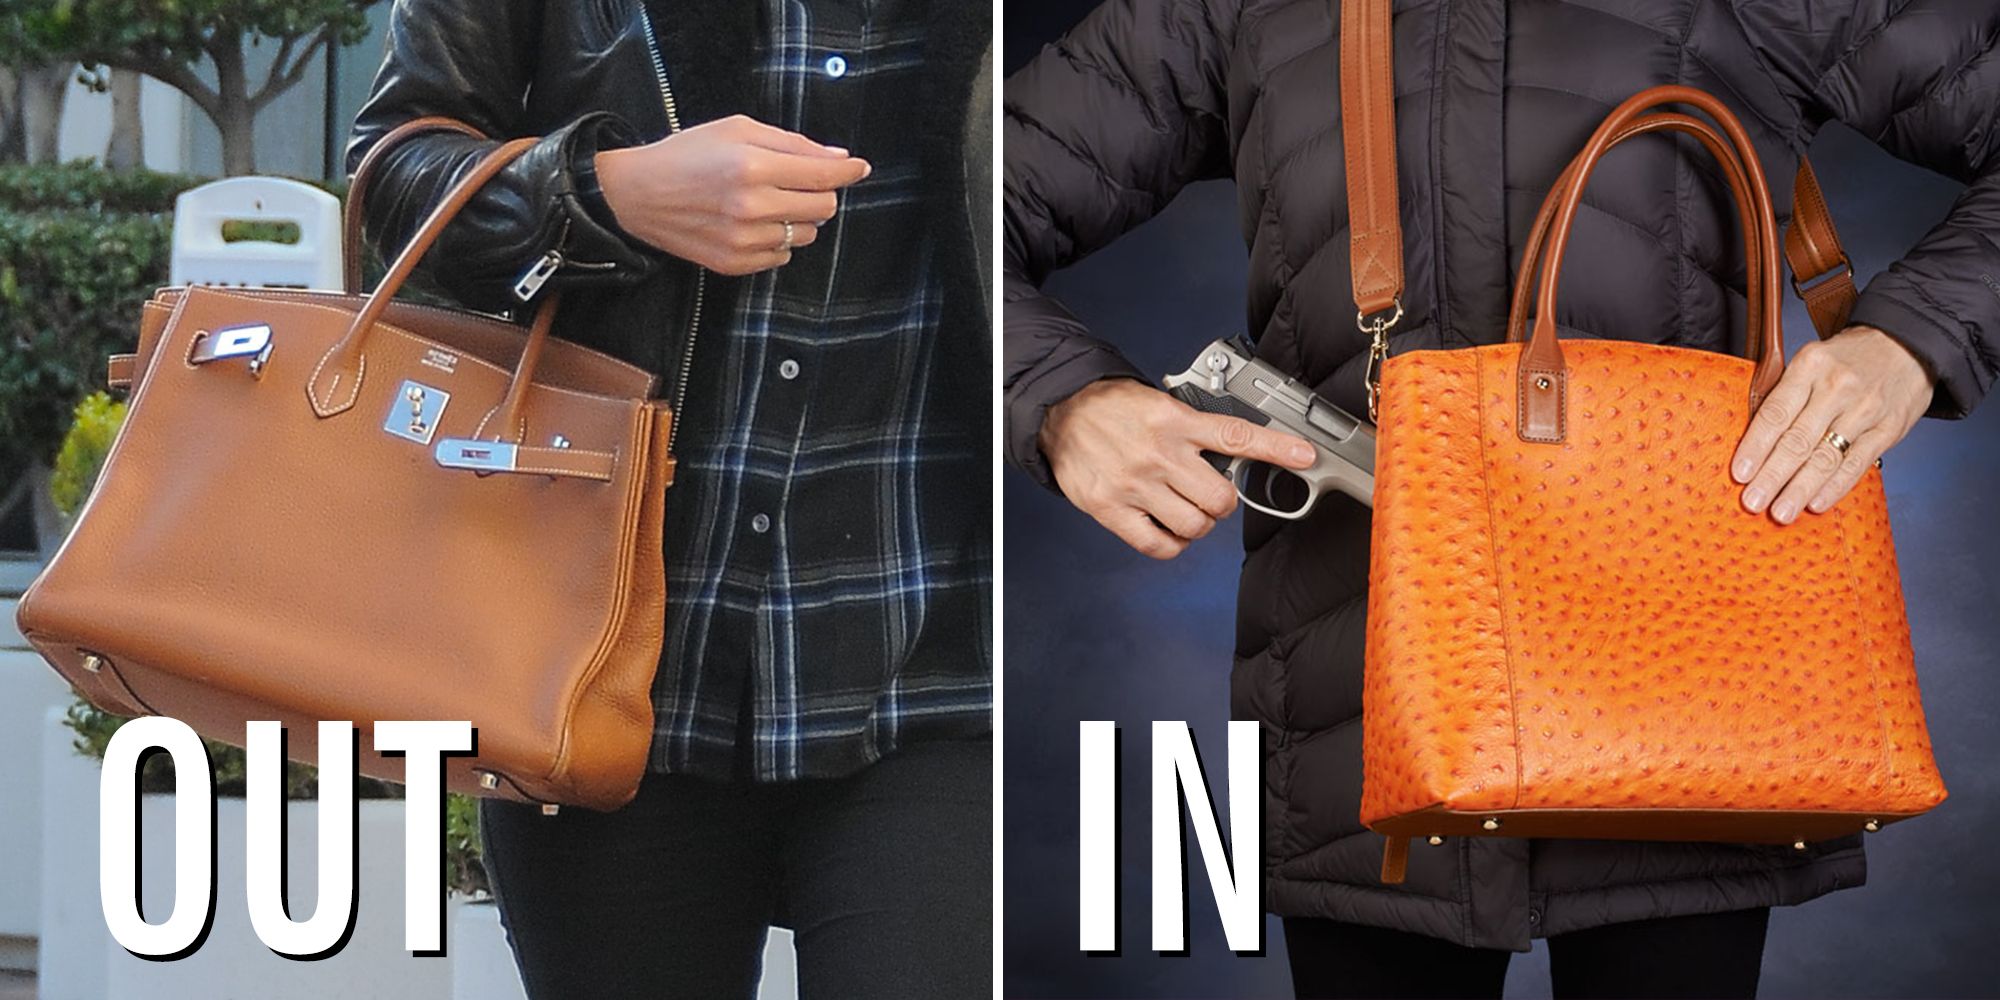 Top 9 Concealed Carry Purse Styles You Should Own